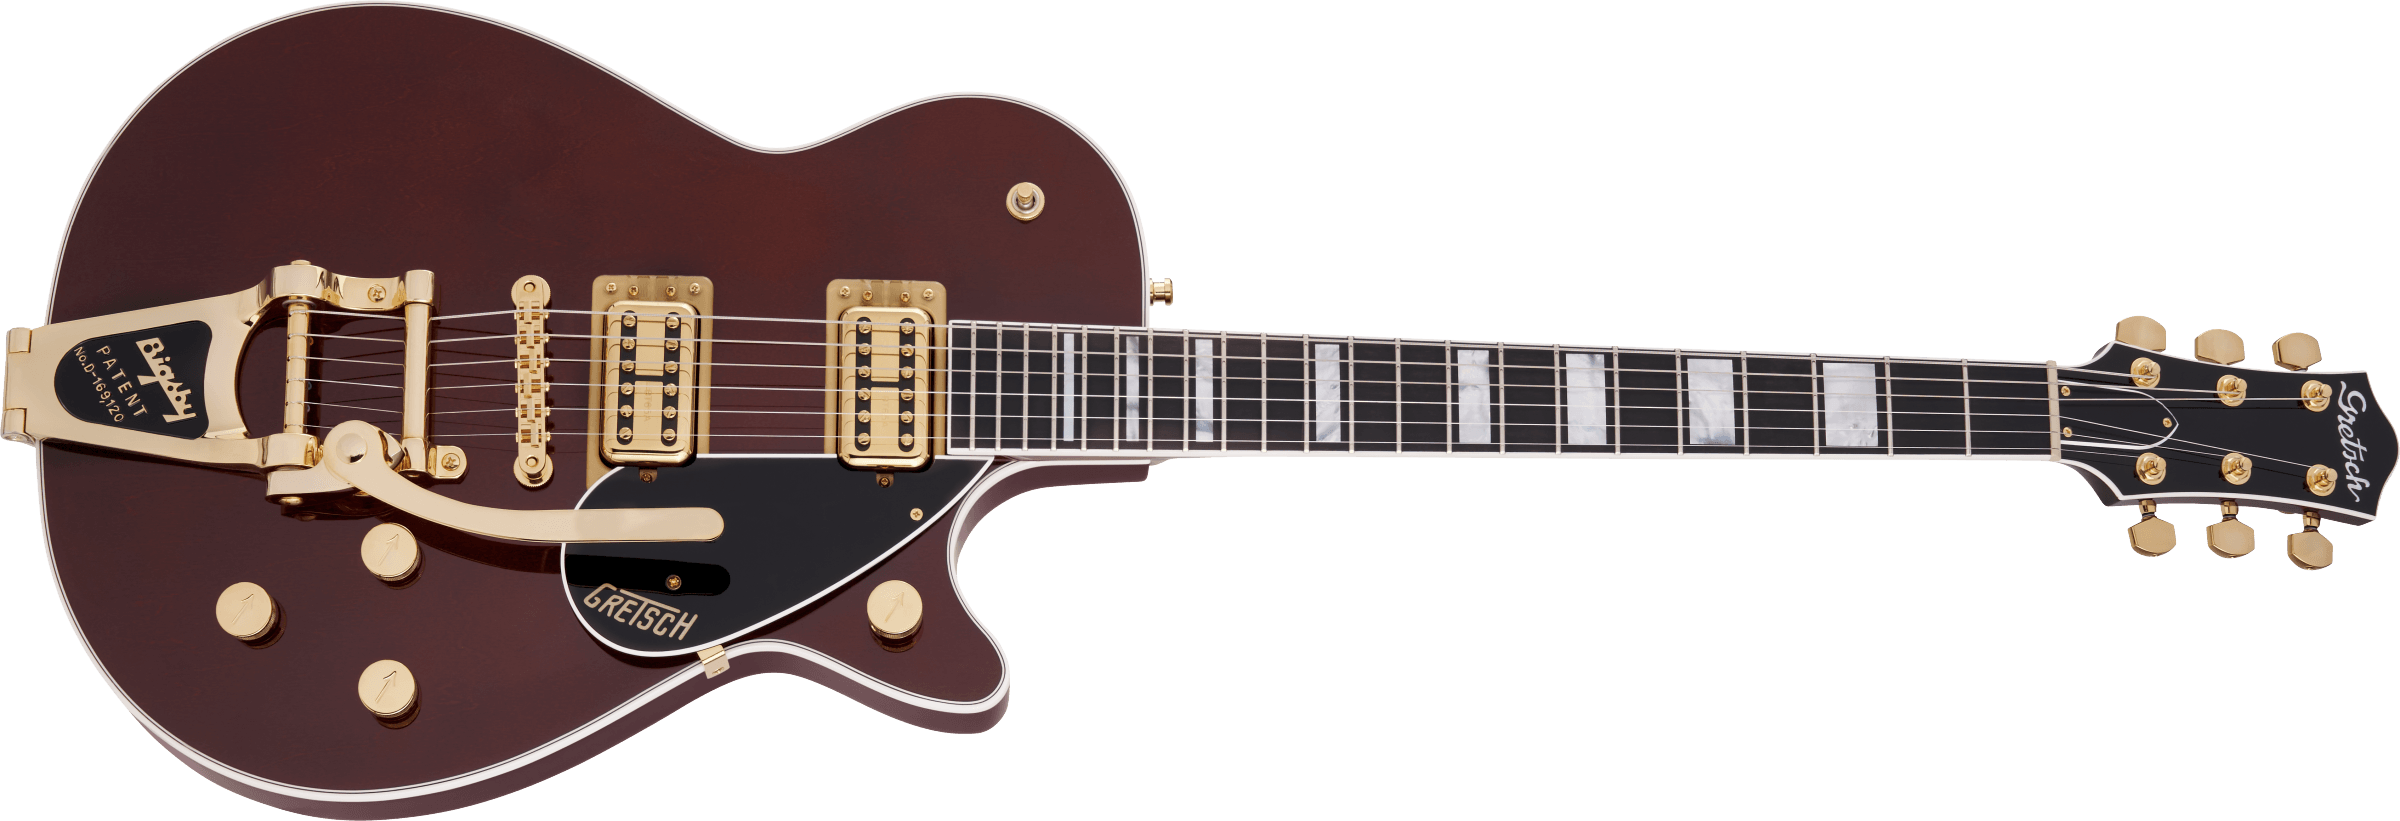 G6228TG Players Edition Jet BT with Bigsby and Gold Hardware, Ebony Fingerboard, Walnut Stain追加画像